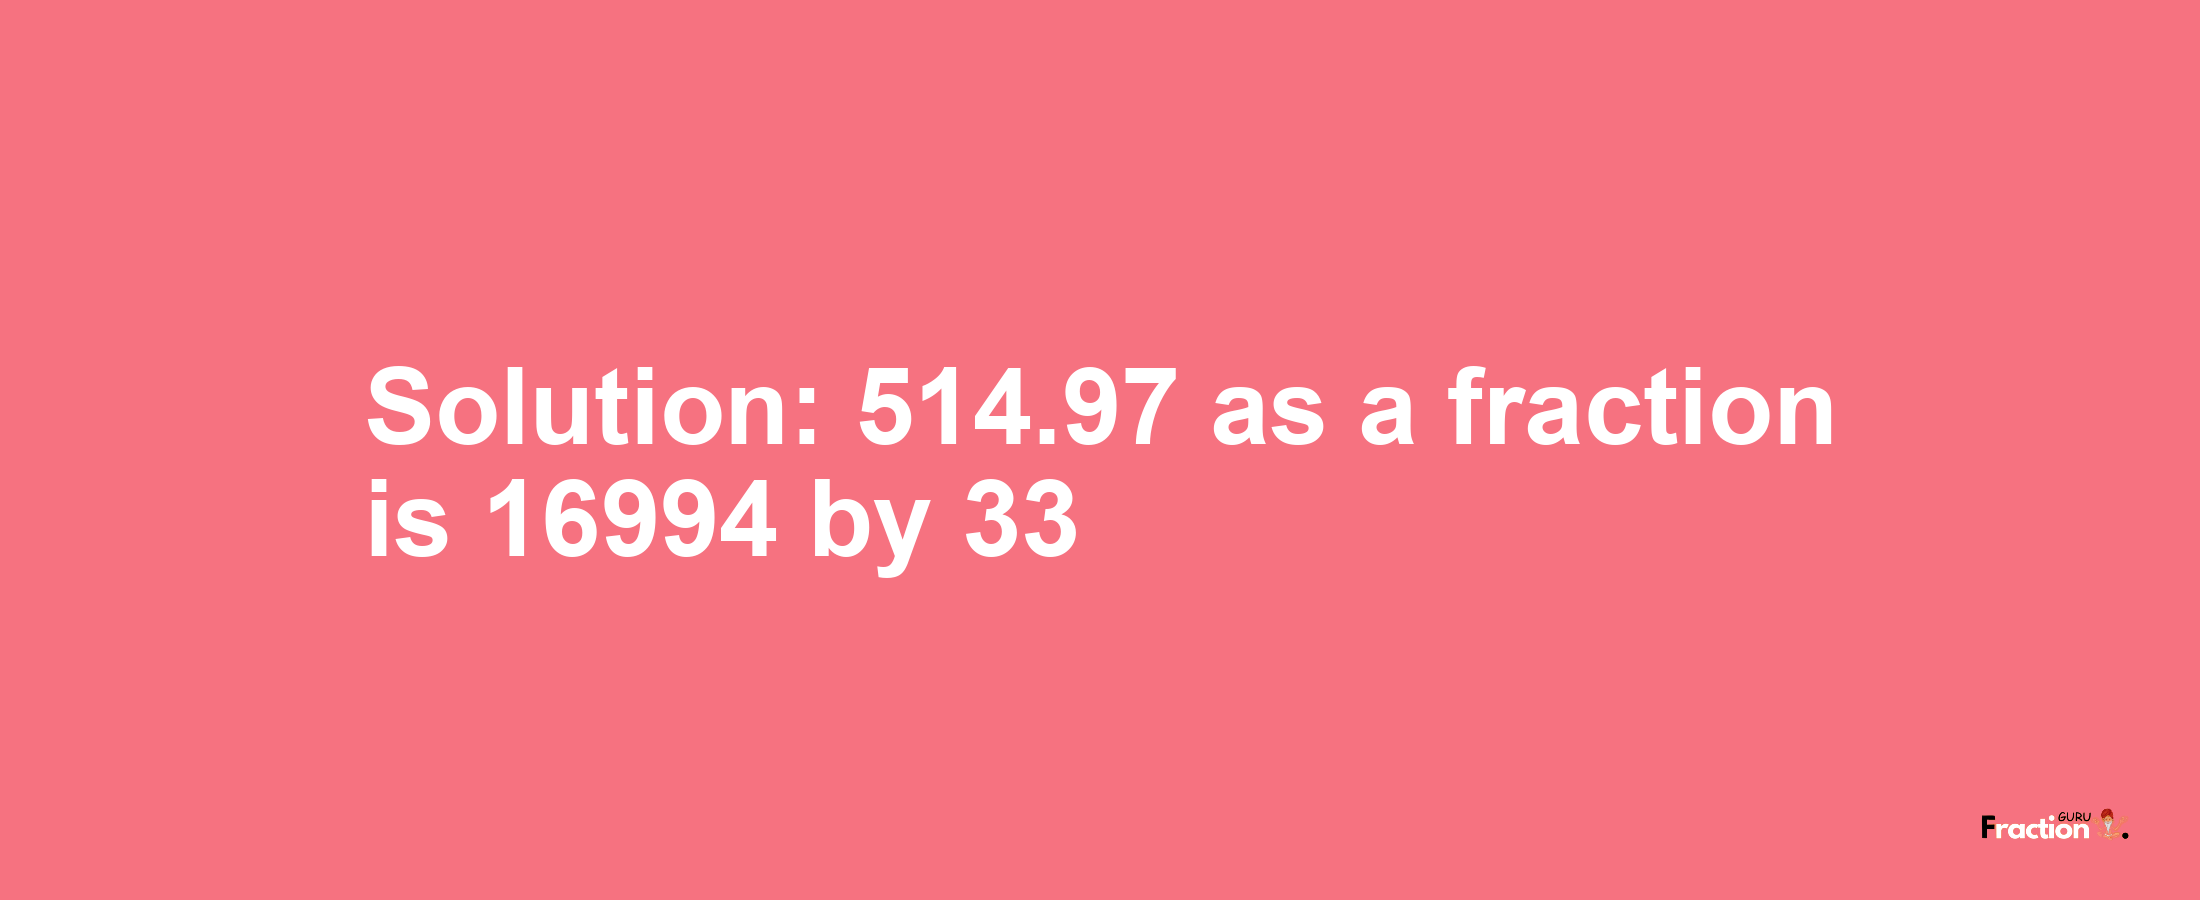 Solution:514.97 as a fraction is 16994/33